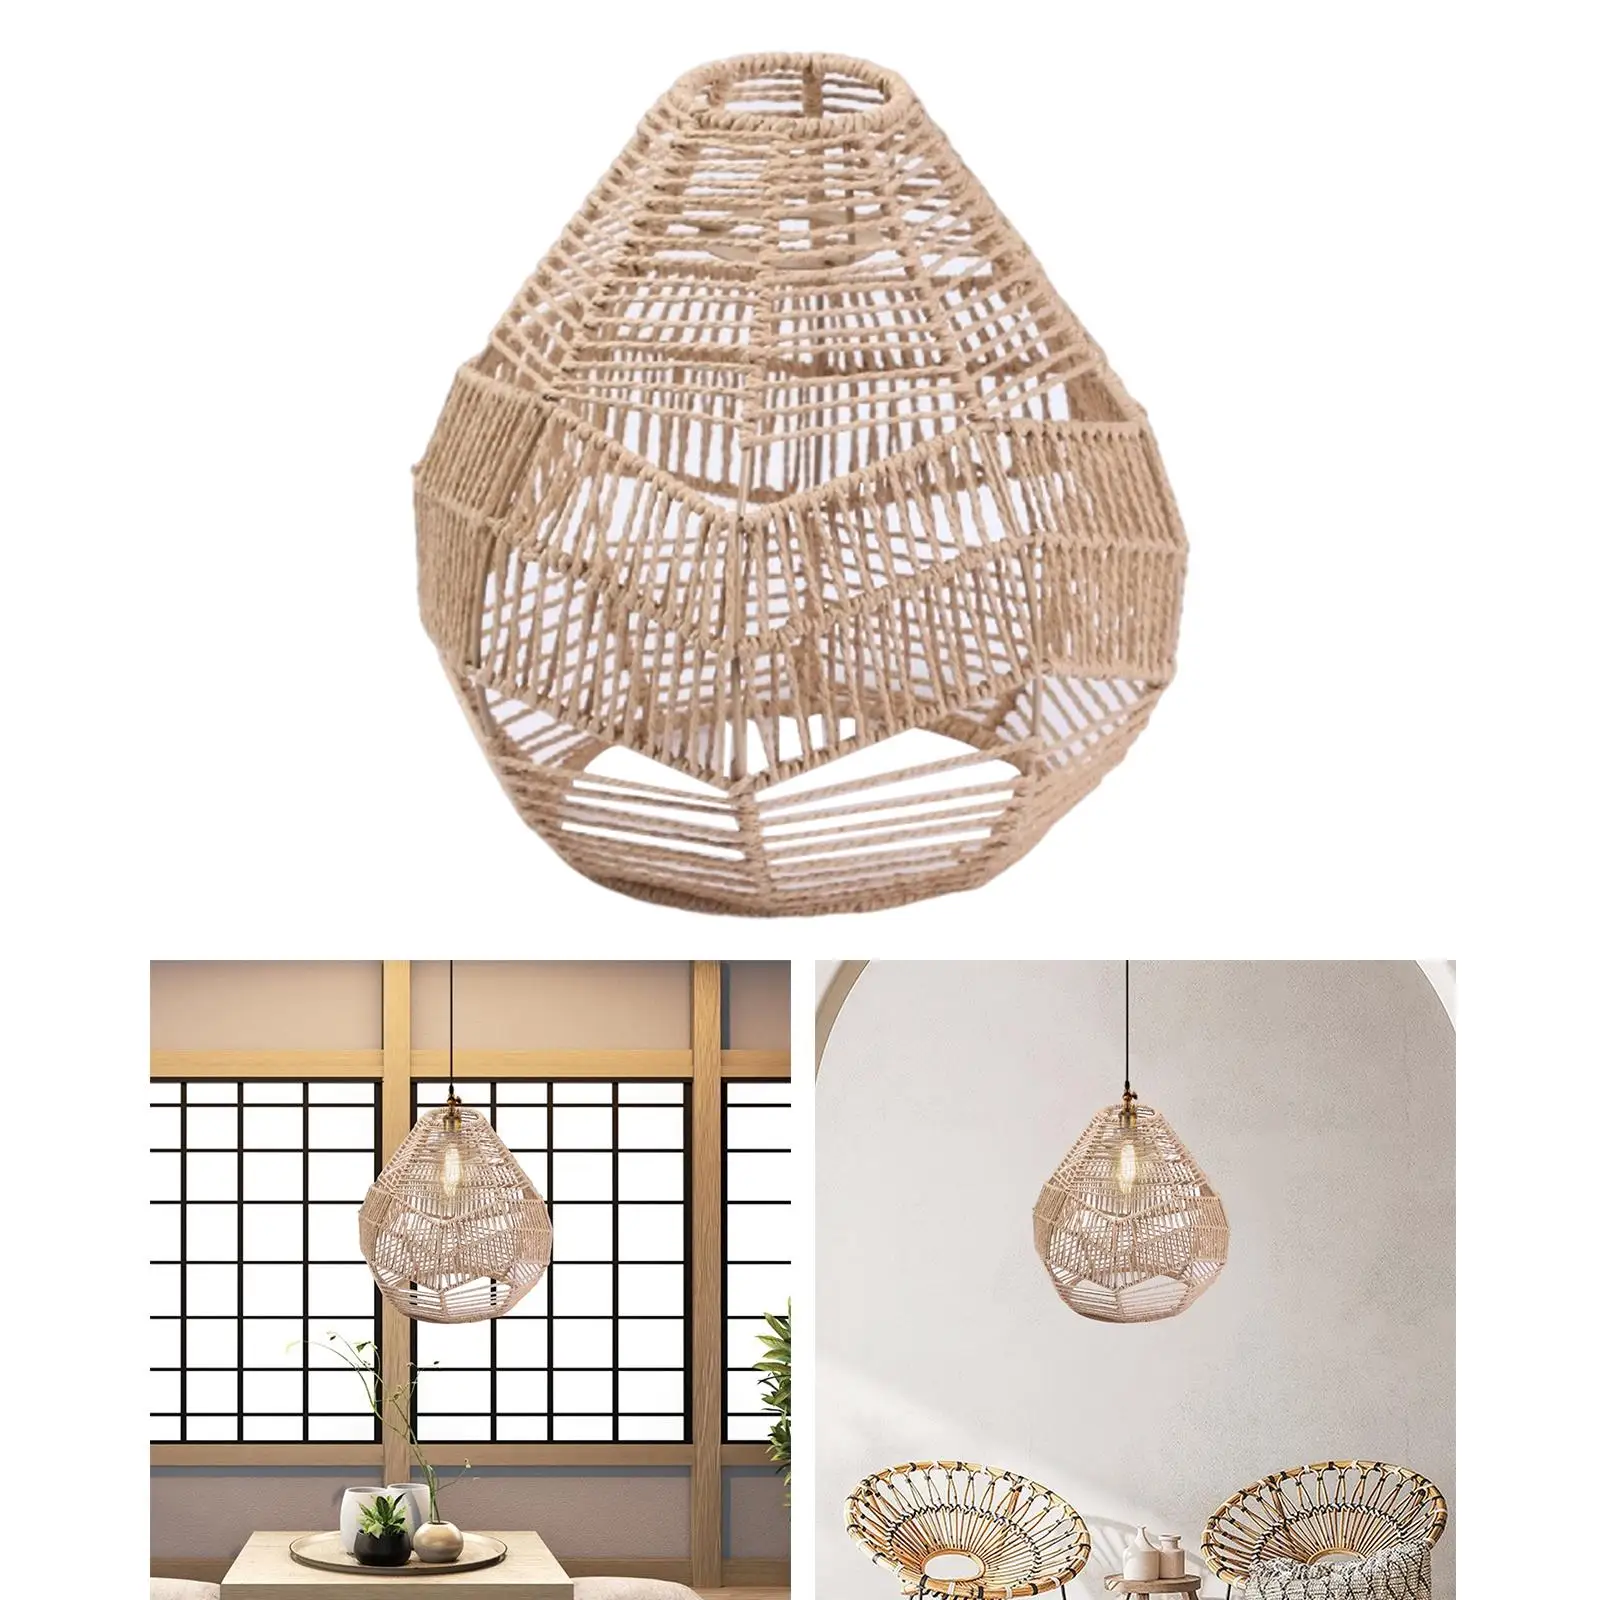 Handwoven Lamp Shade Hanging Light Fixture Cover Ceiling Light Shade Lampshade for Hotel Teahouse Living Room Decoration